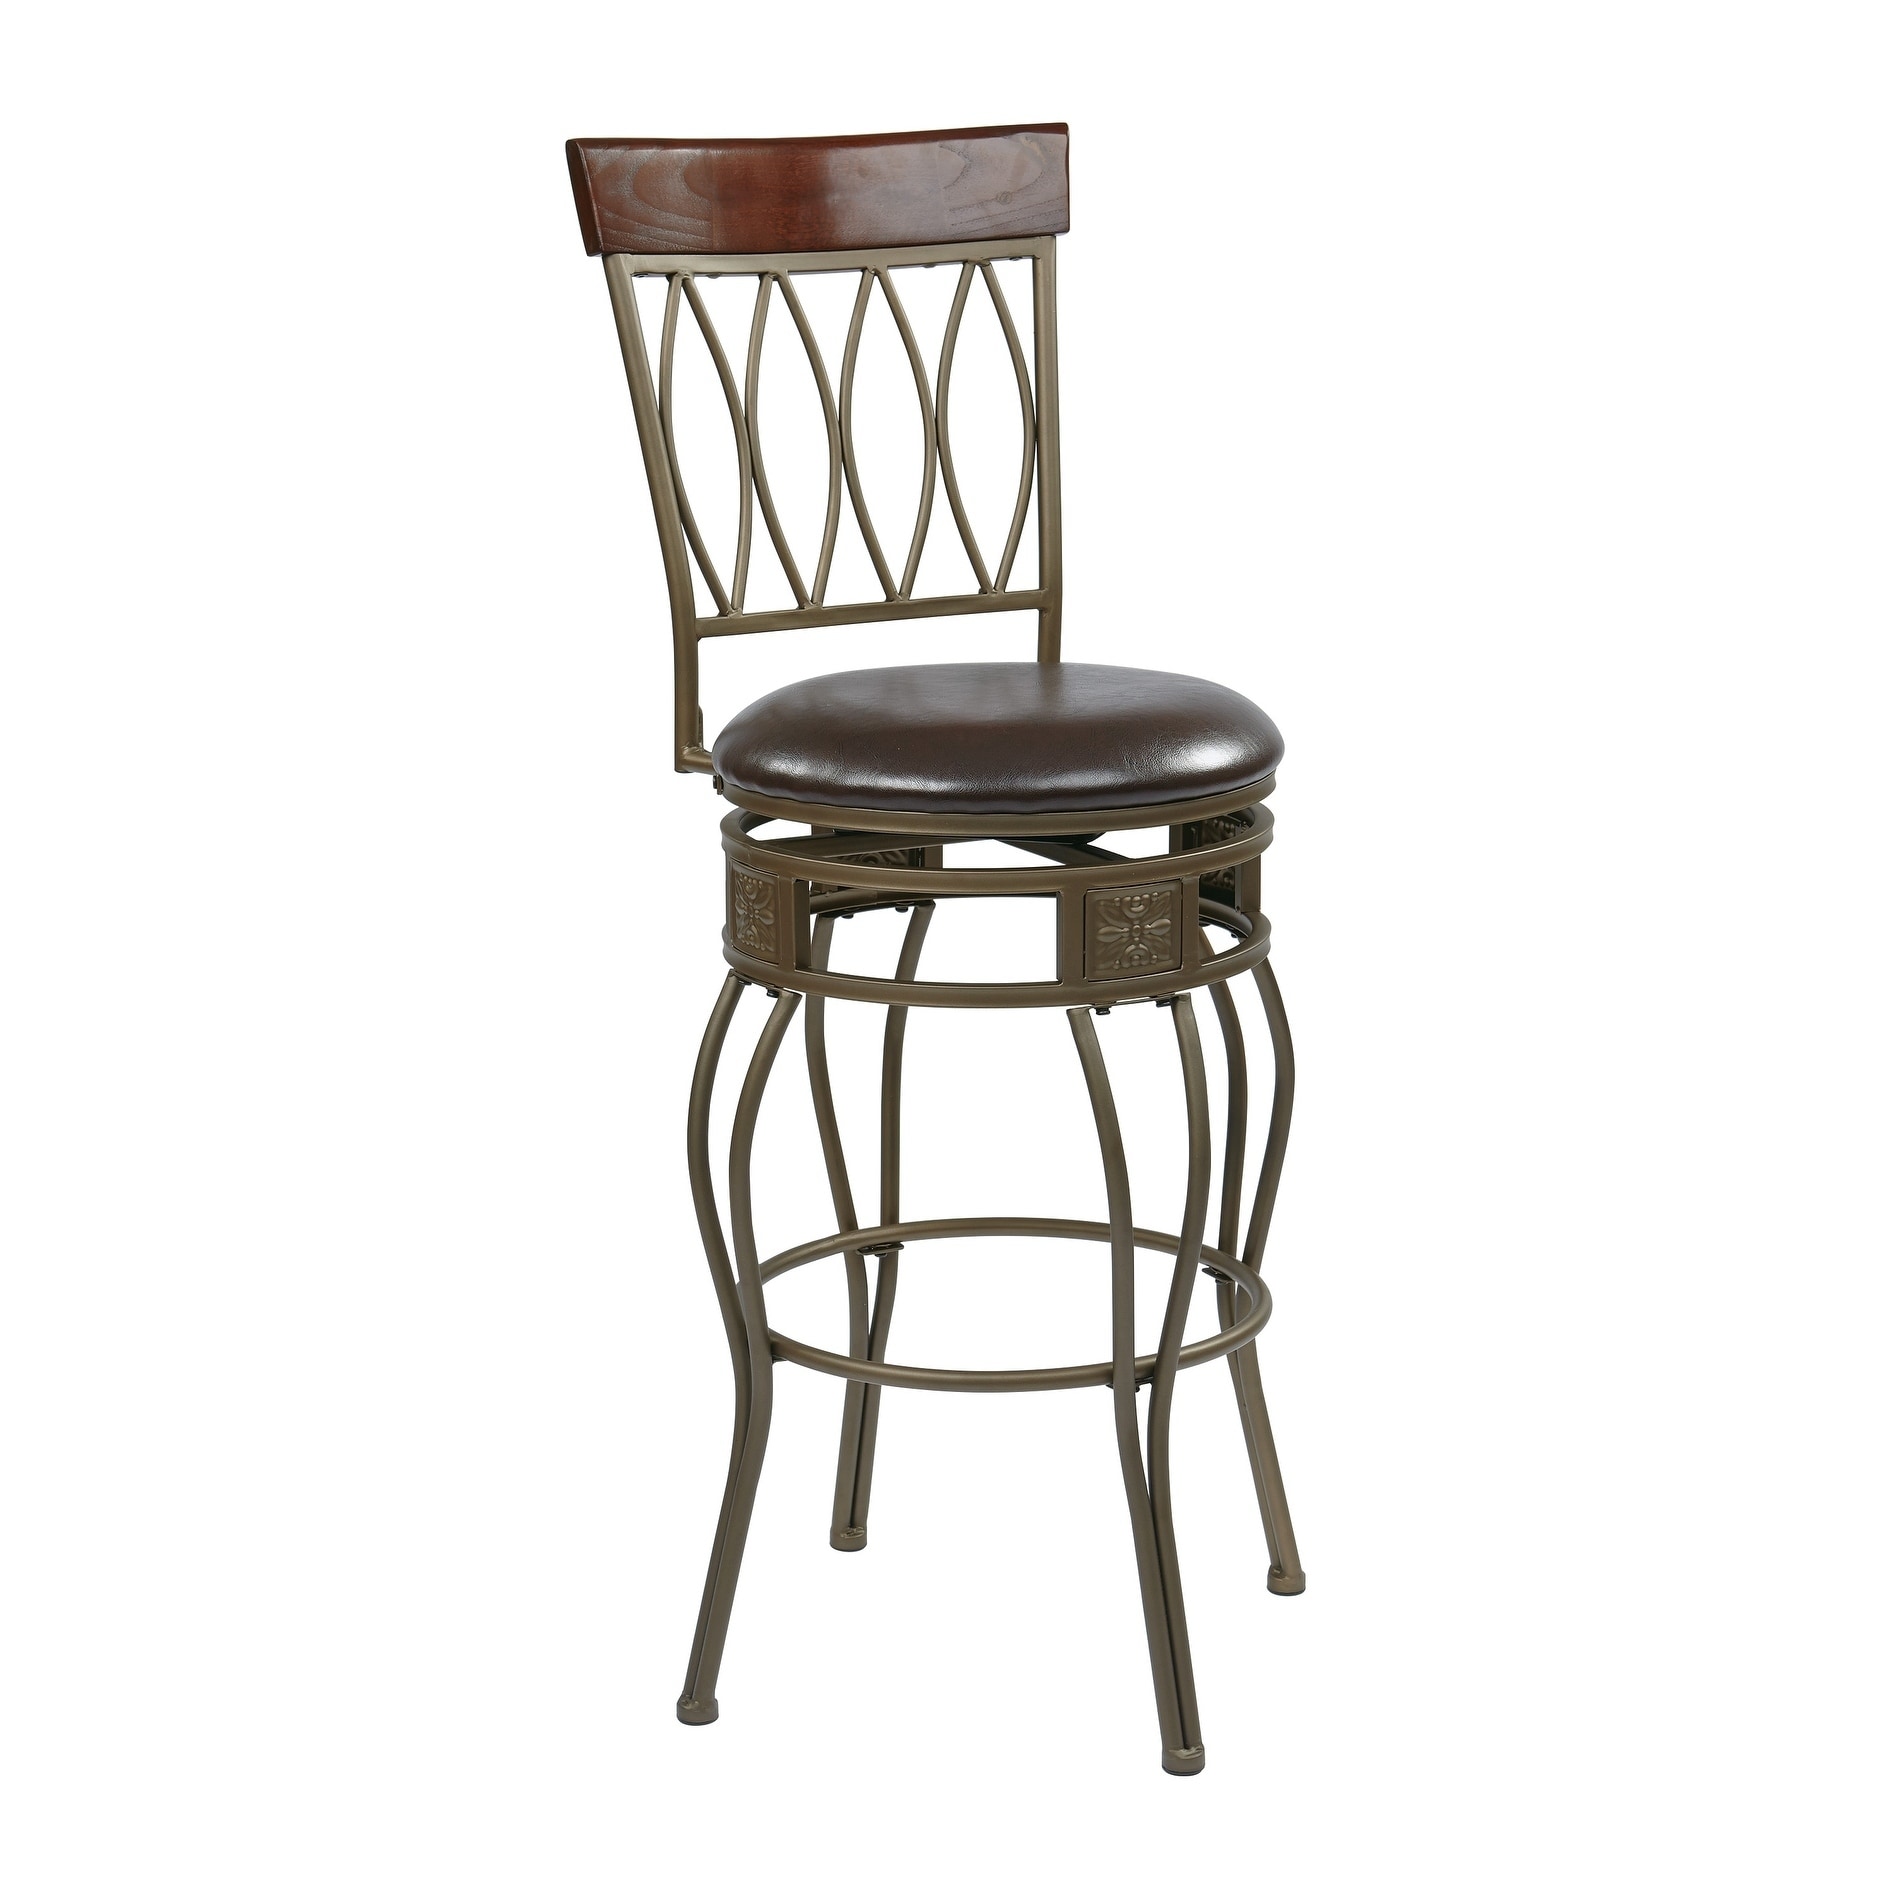 Cosmo 30 inch Ash Metal Upholstered Swivel Barstool Today $90.99